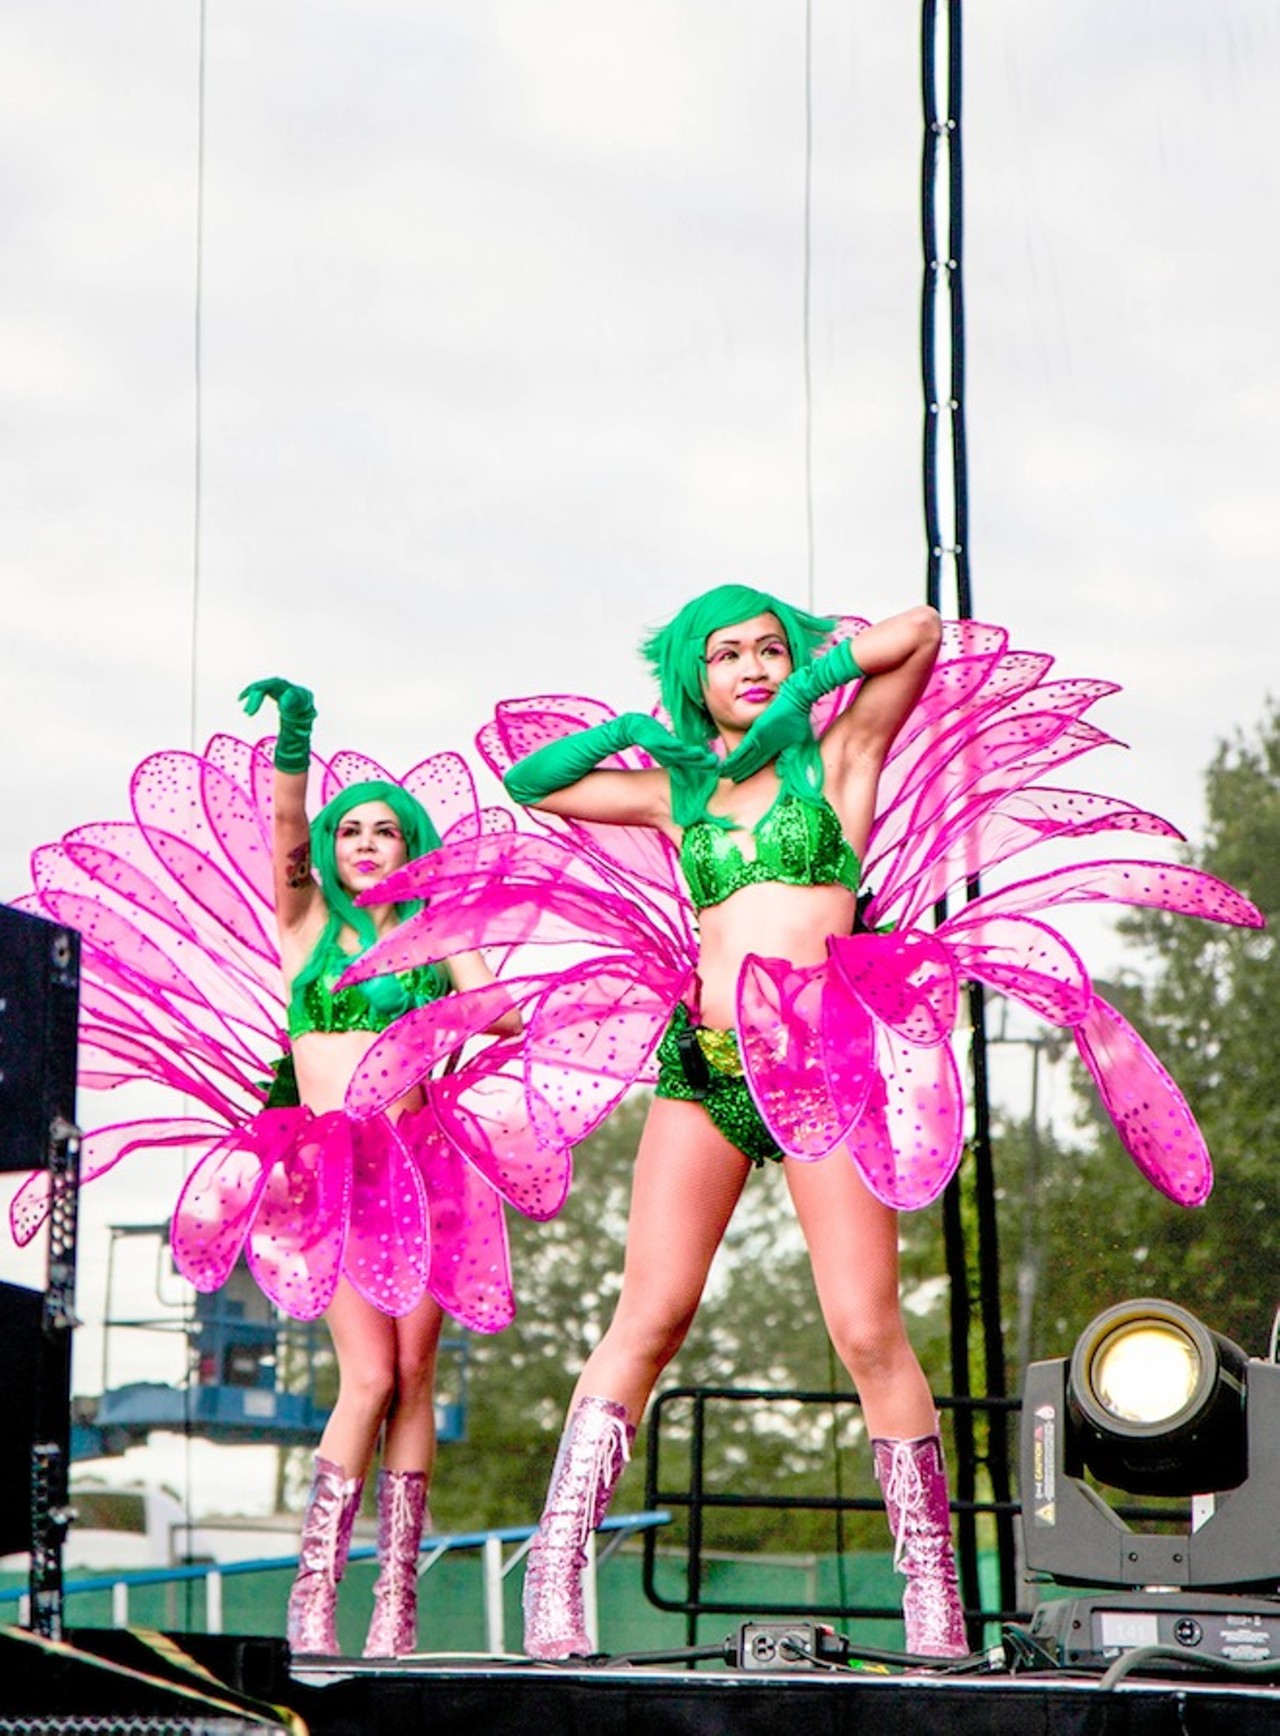 50 wildest photos from Electric Daisy Carnival Orlando 2013